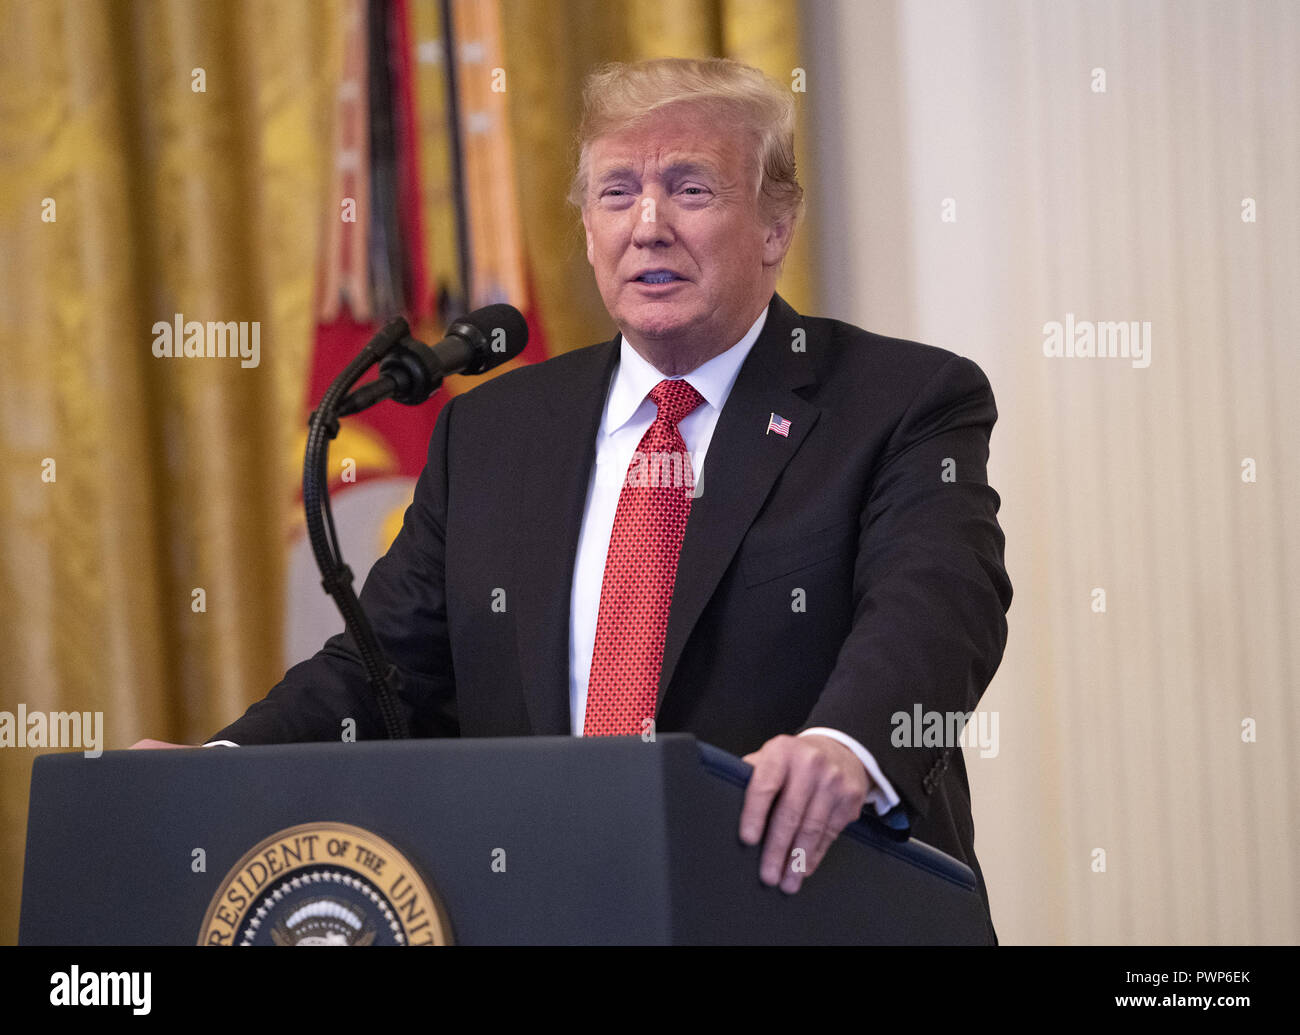 Washington, District of Columbia, USA. 17th Oct, 2018. United States President Donald J. Trump makes remarks as he awards the Medal of Honor to Sergeant Major John L. Canley, United States Marine Corps (Retired), for conspicuous gallantry during the Vietnam War in a ceremony in the East Room of the the White House in Washington, DC on Wednesday, October 17, 2018 Credit: Ron Sachs/CNP/ZUMA Wire/Alamy Live News Stock Photo